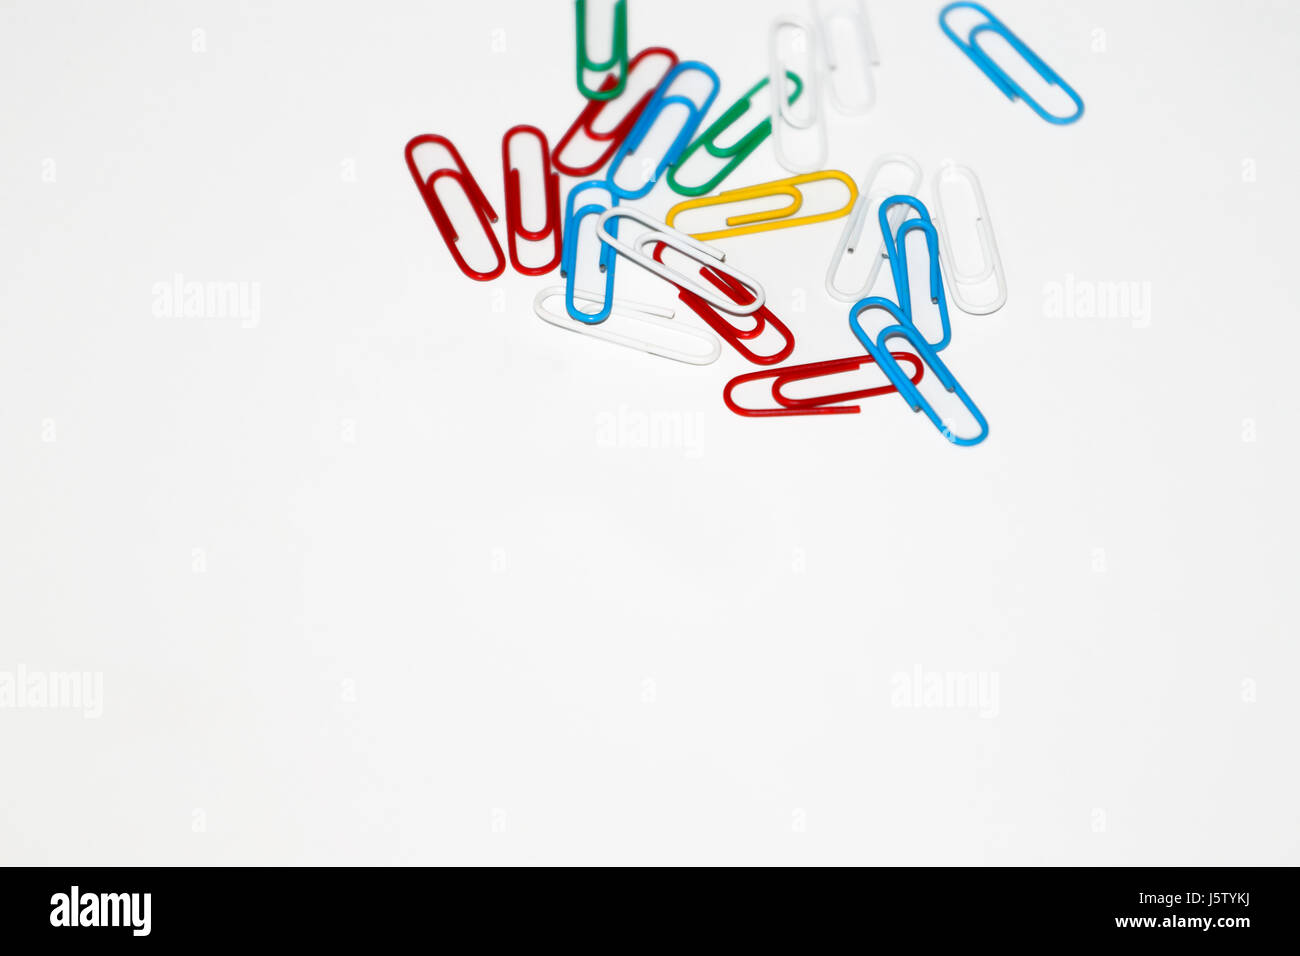 Colored paper clips on white background Stock Photo